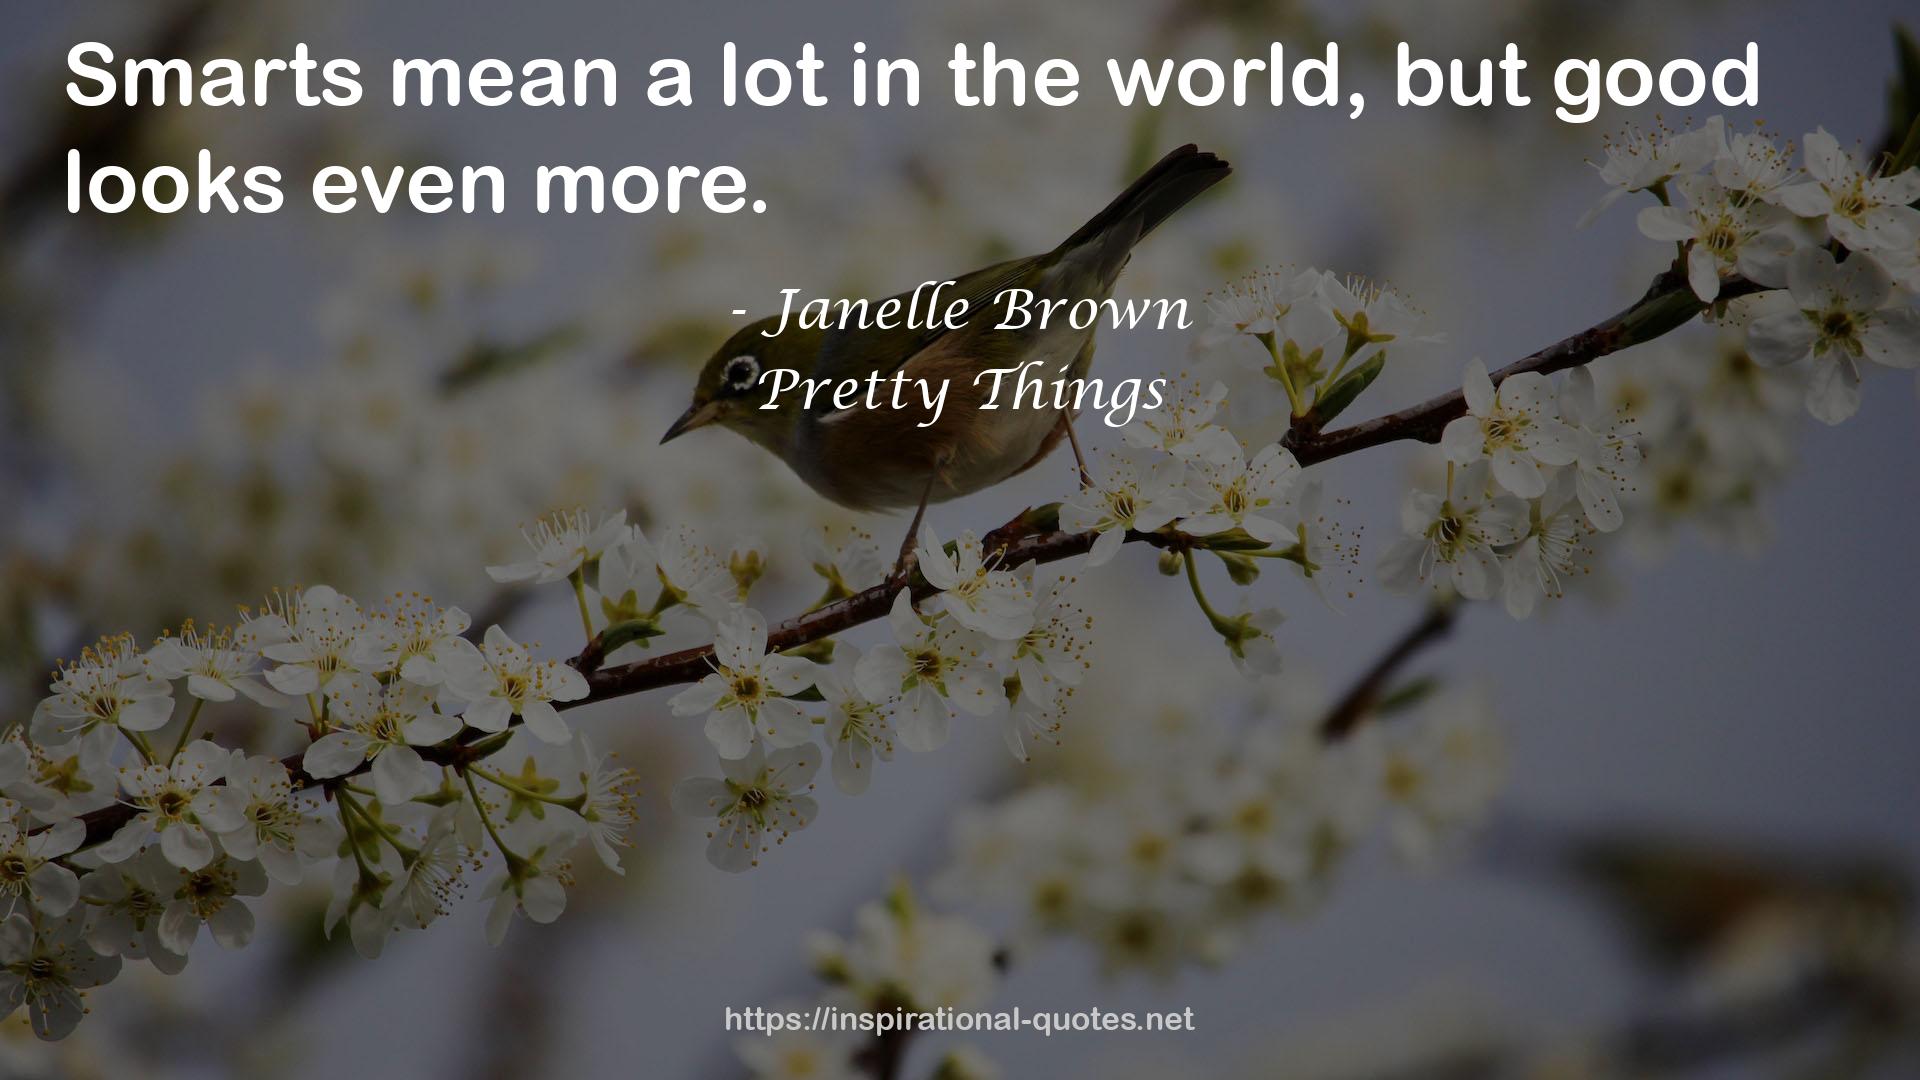 Janelle Brown QUOTES